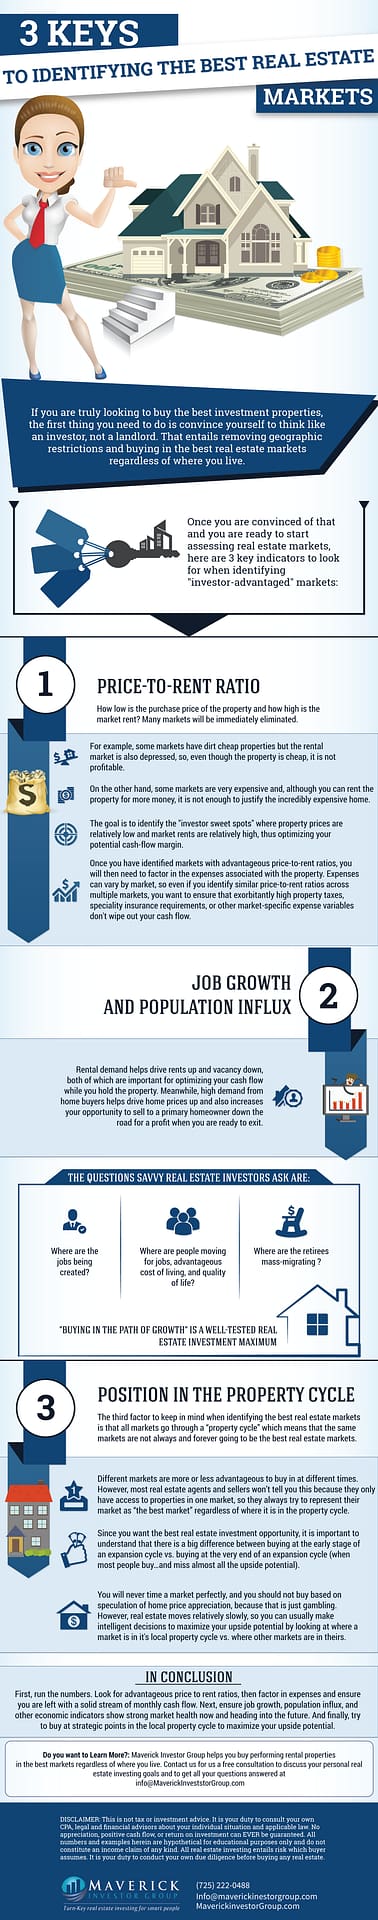 InfoGraphic 3 Keys to Identifying the Best Real Estate-Markets